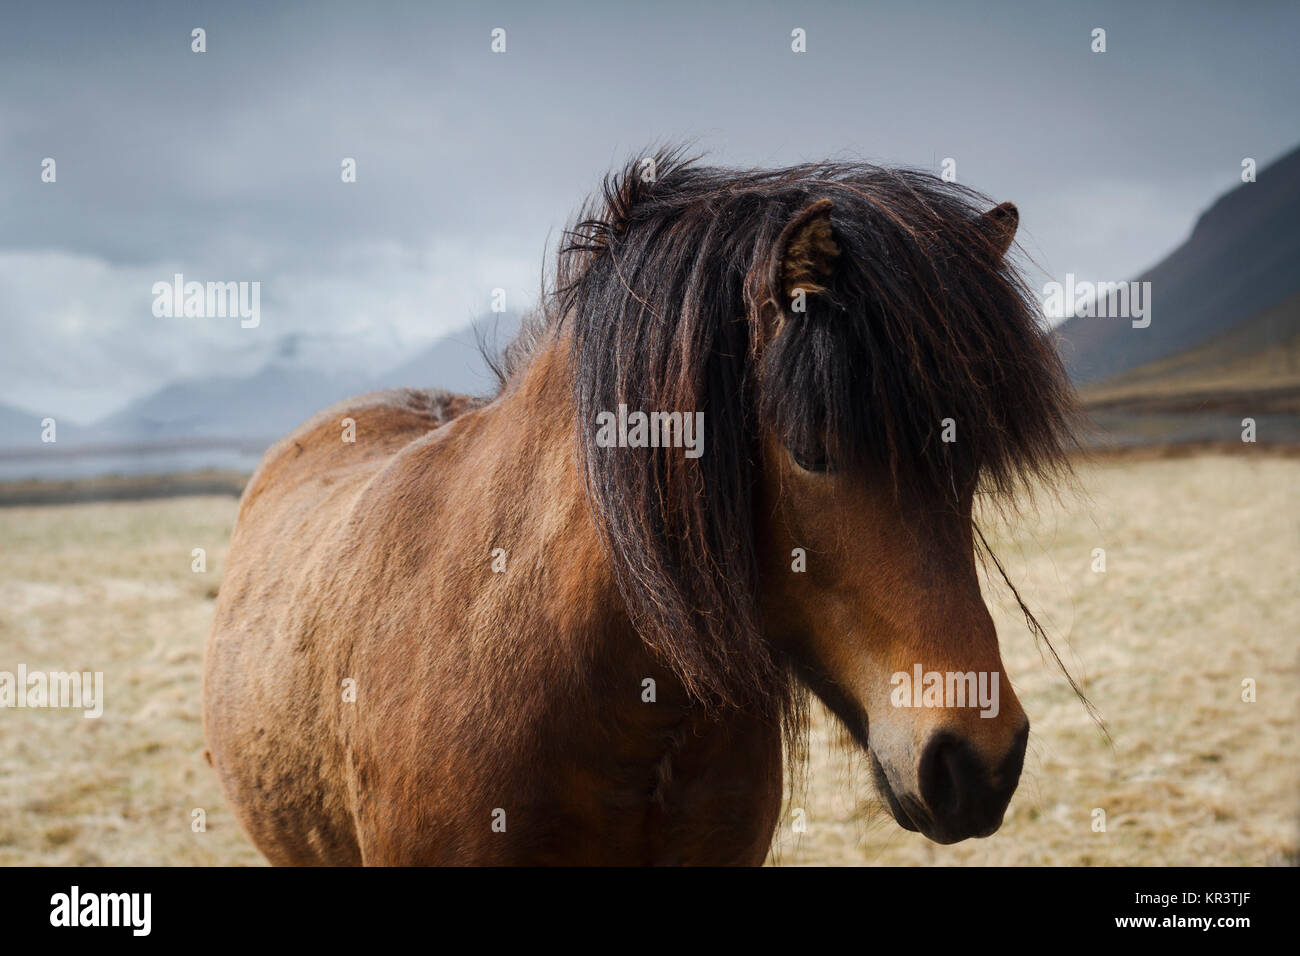 Close up of an Icelandic brown horse on a field Stock Photo